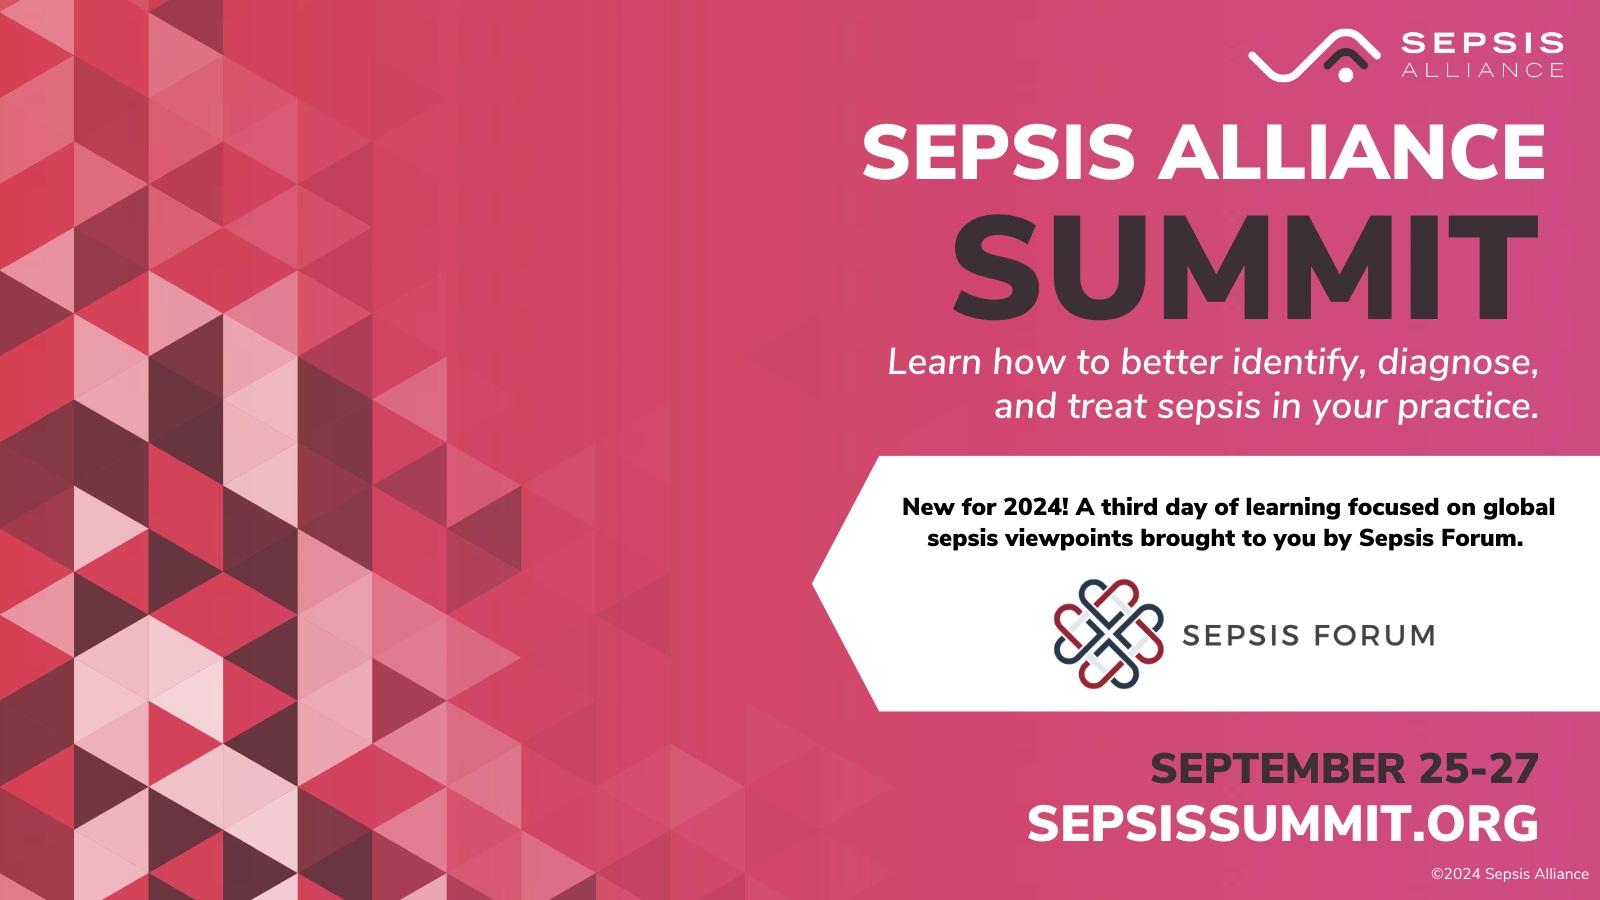 Sepsis Summit Save the Date